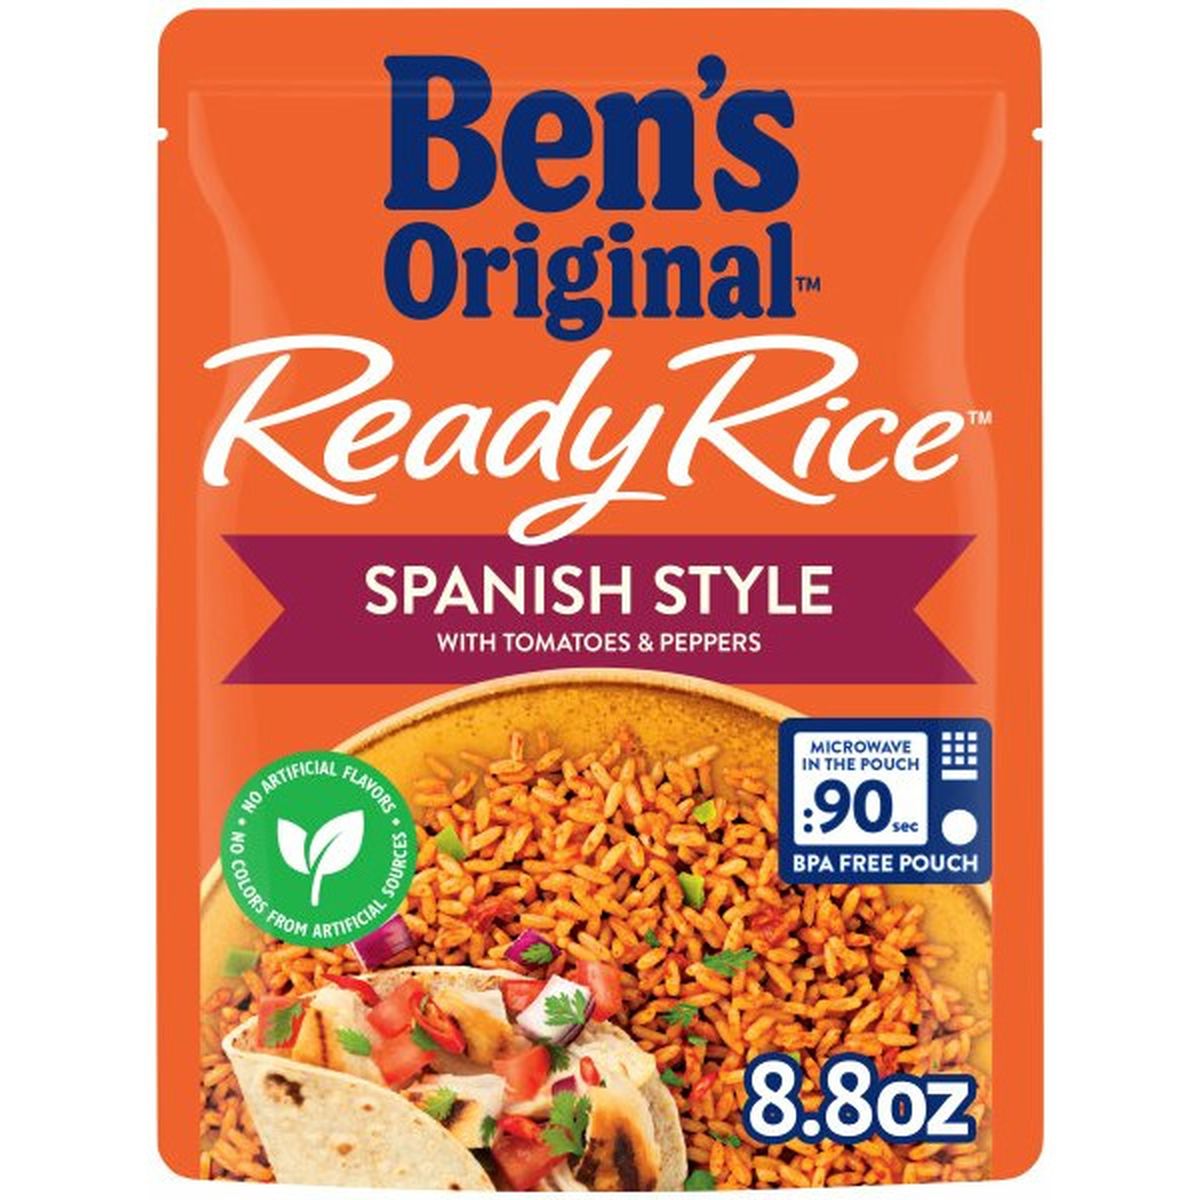 Calories in Ben's Original Ready Rice Rice with Tomatoes & Peppers, Spanish Style